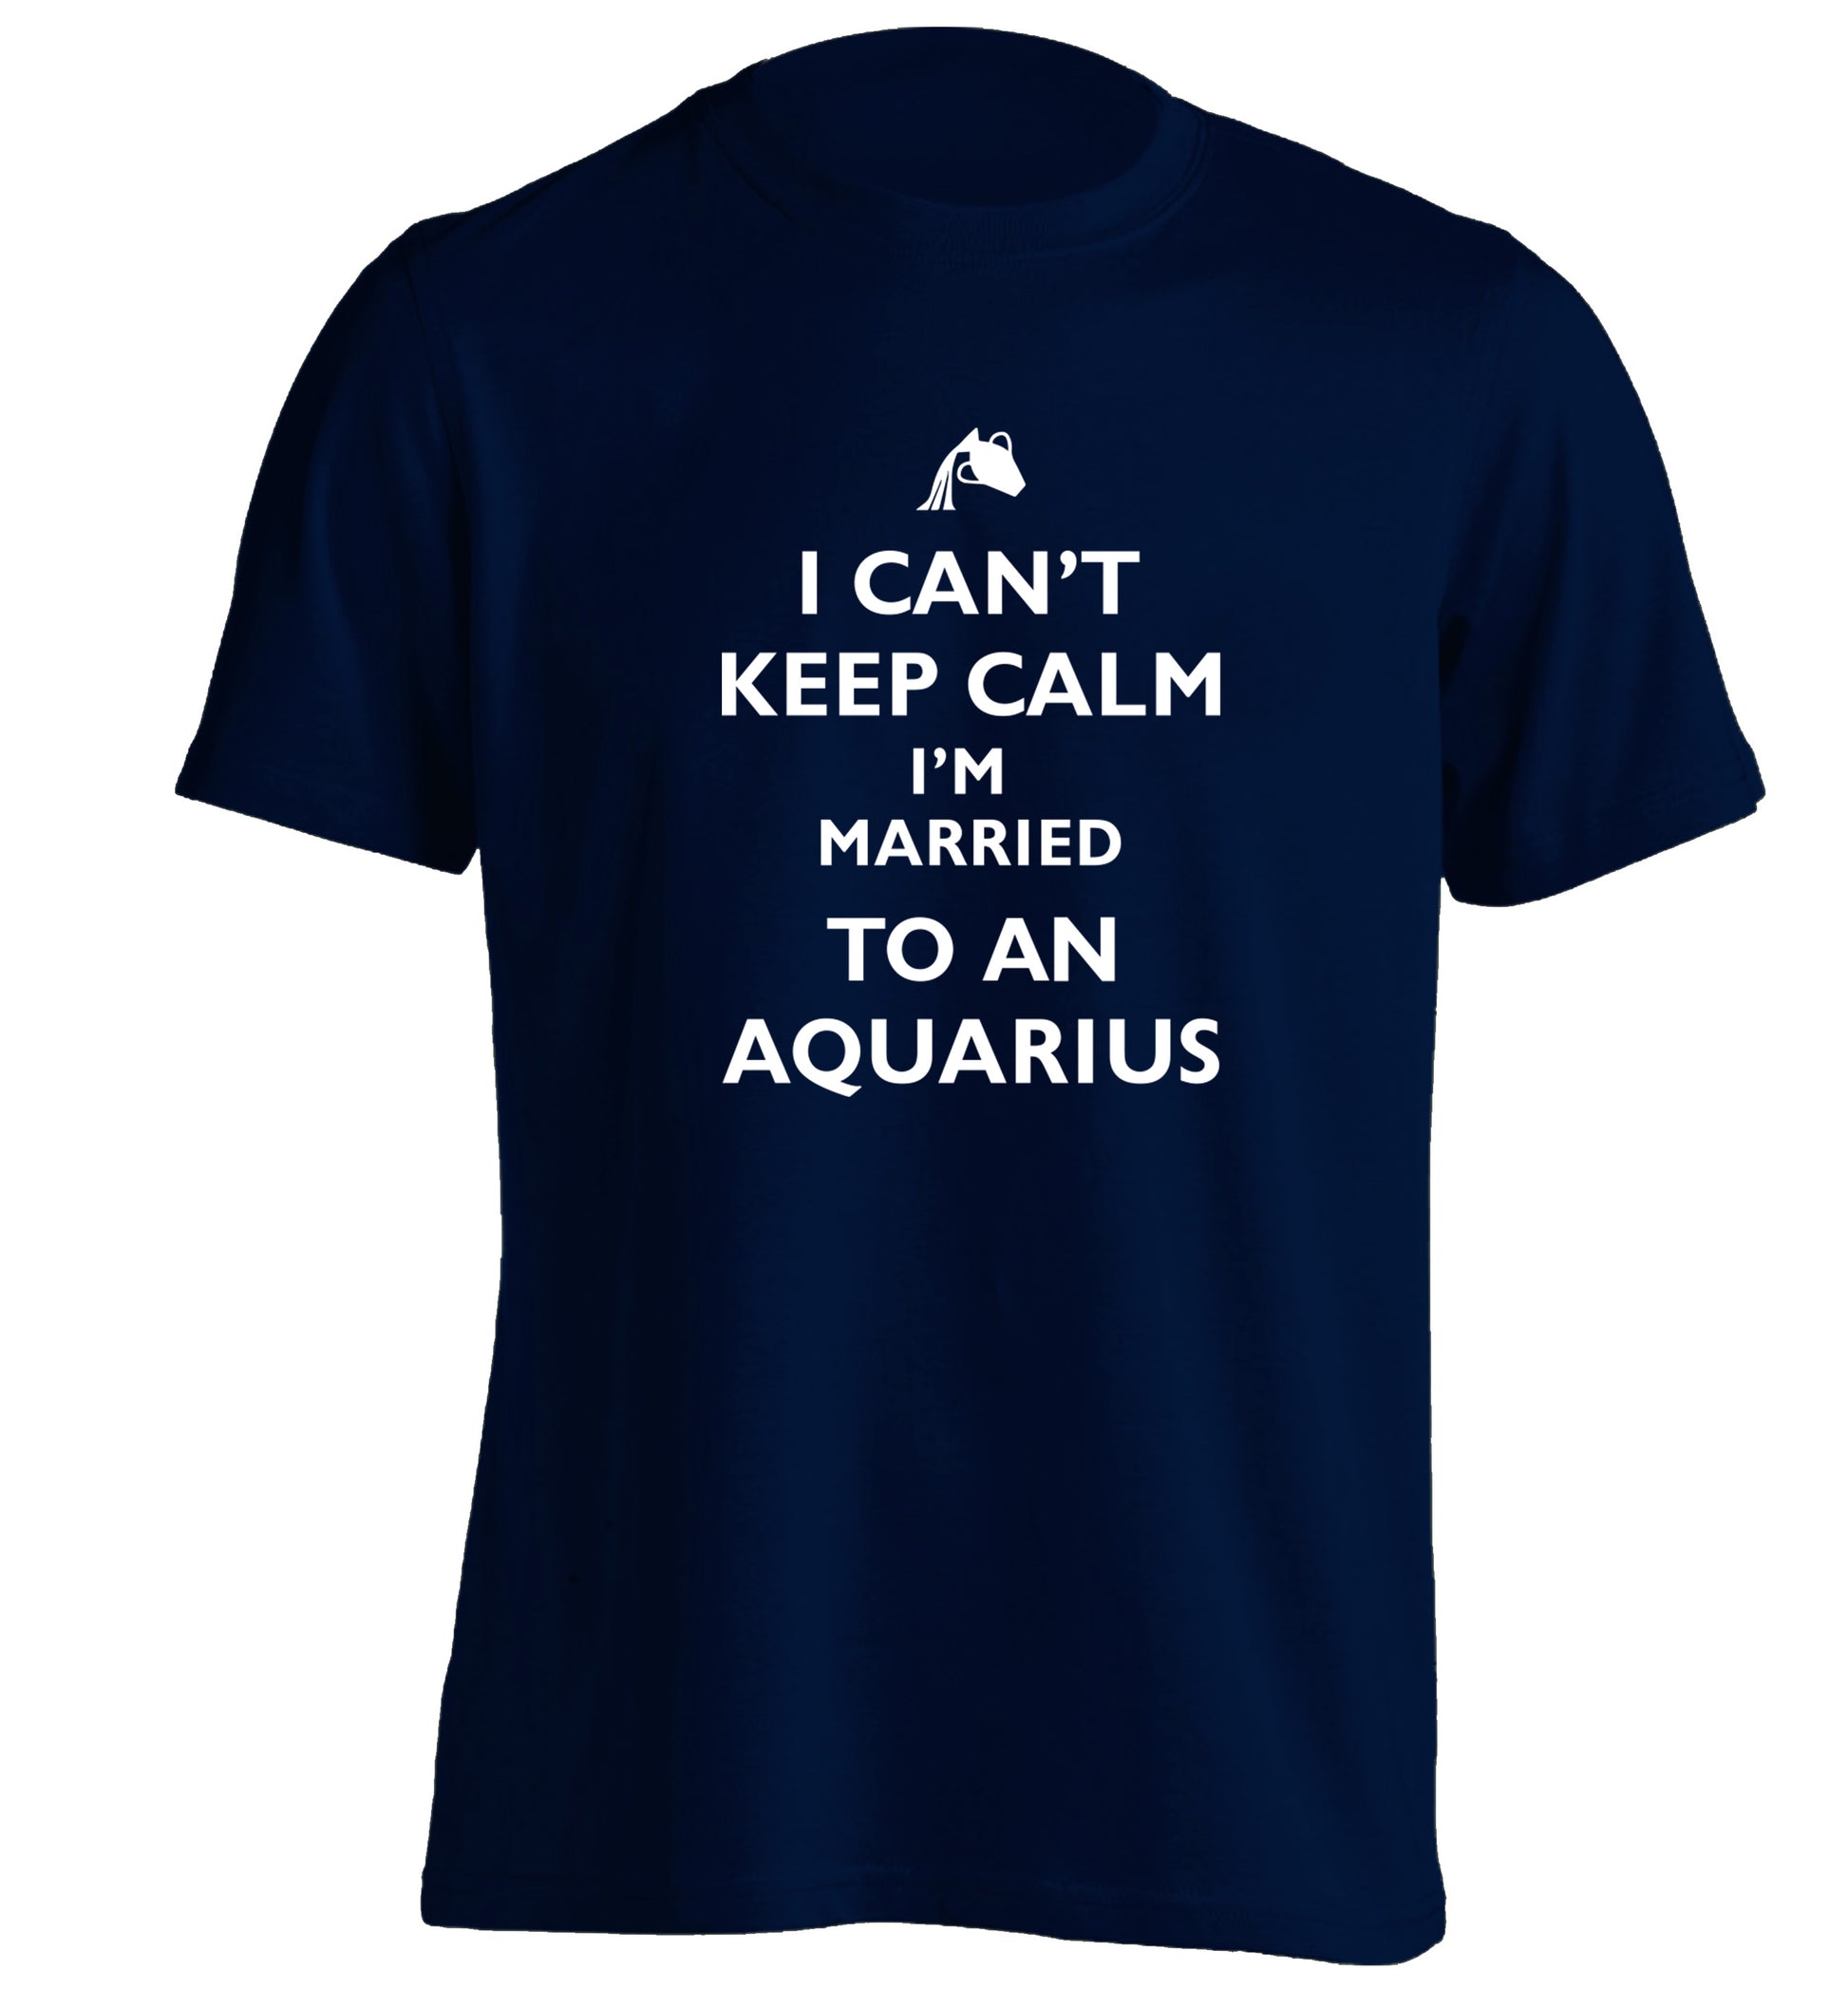 I can't keep calm I'm married to an aquarius adults unisex navy Tshirt 2XL